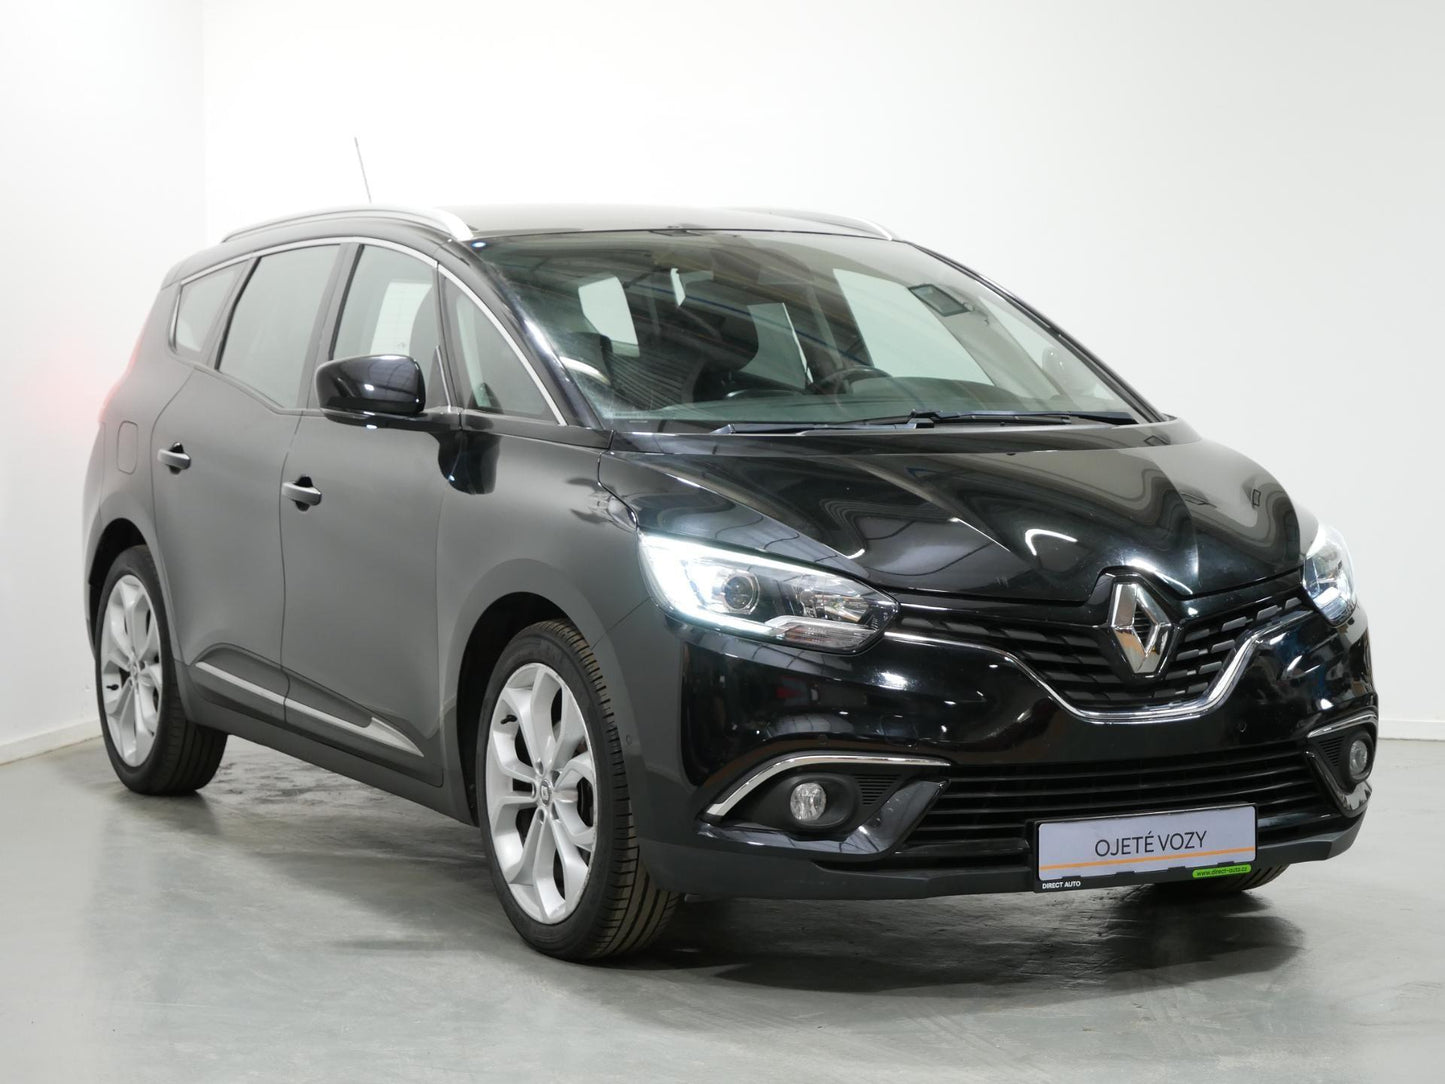 Renault Scénic 1.5 DCI 81 kW Business